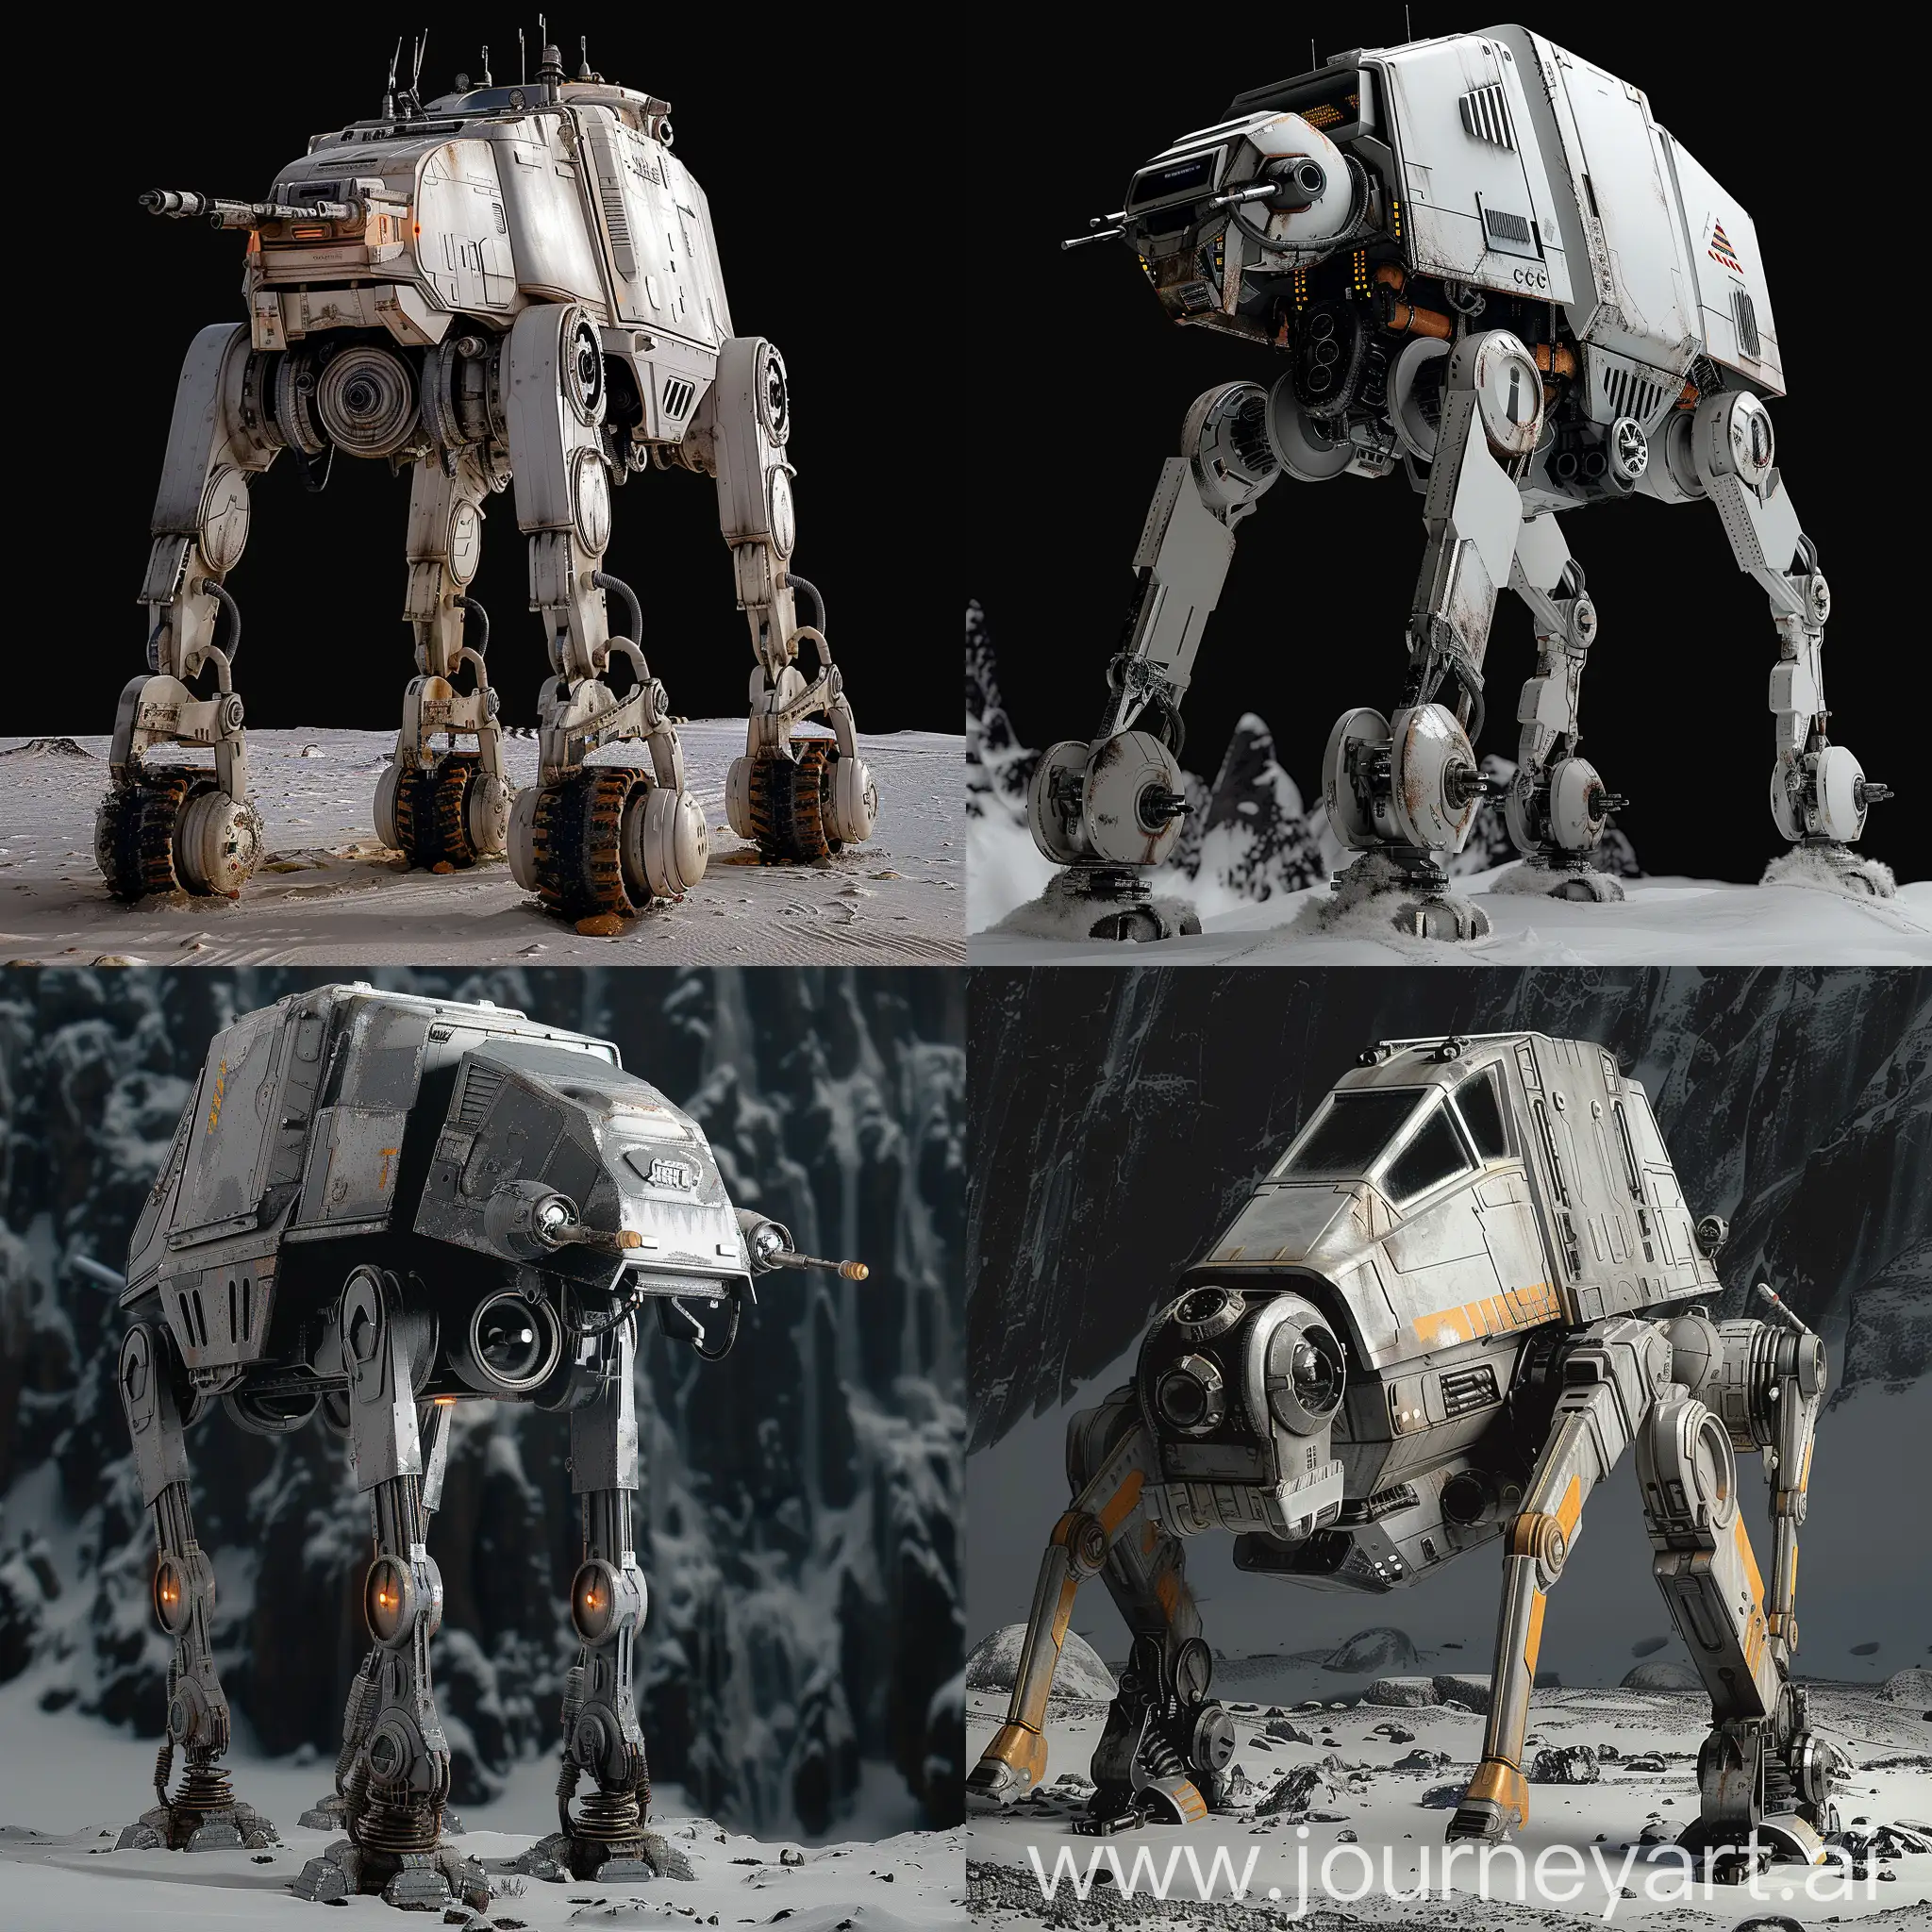 Futuristic Star Wars All Terrain Scout Transport https://static.wikia.nocookie.net/starwars/images/f/ff/ATST-SWBdice.png/revision/latest?cb=20230723050455, Adaptive Camouflage, Energy Shields, Multi-Terrain Locomotion, Self-Repair Systems, Advanced Sensor Suite, Hyperspace Beacon, AI-Assisted Targeting, Sonic Disruptor, Detachable Drone Launchers, Emergency Ejection System, Grappling Claw, Deployable Bridge System, Holographic Disguise Projector, Battlefield Repair Drone, EMP Generator, Cargo Hold, Landing Gear, External Fuel Tanks, Mobile Sensor Buoy Launcher, Covert Operations Package, octane render --stylize 1000